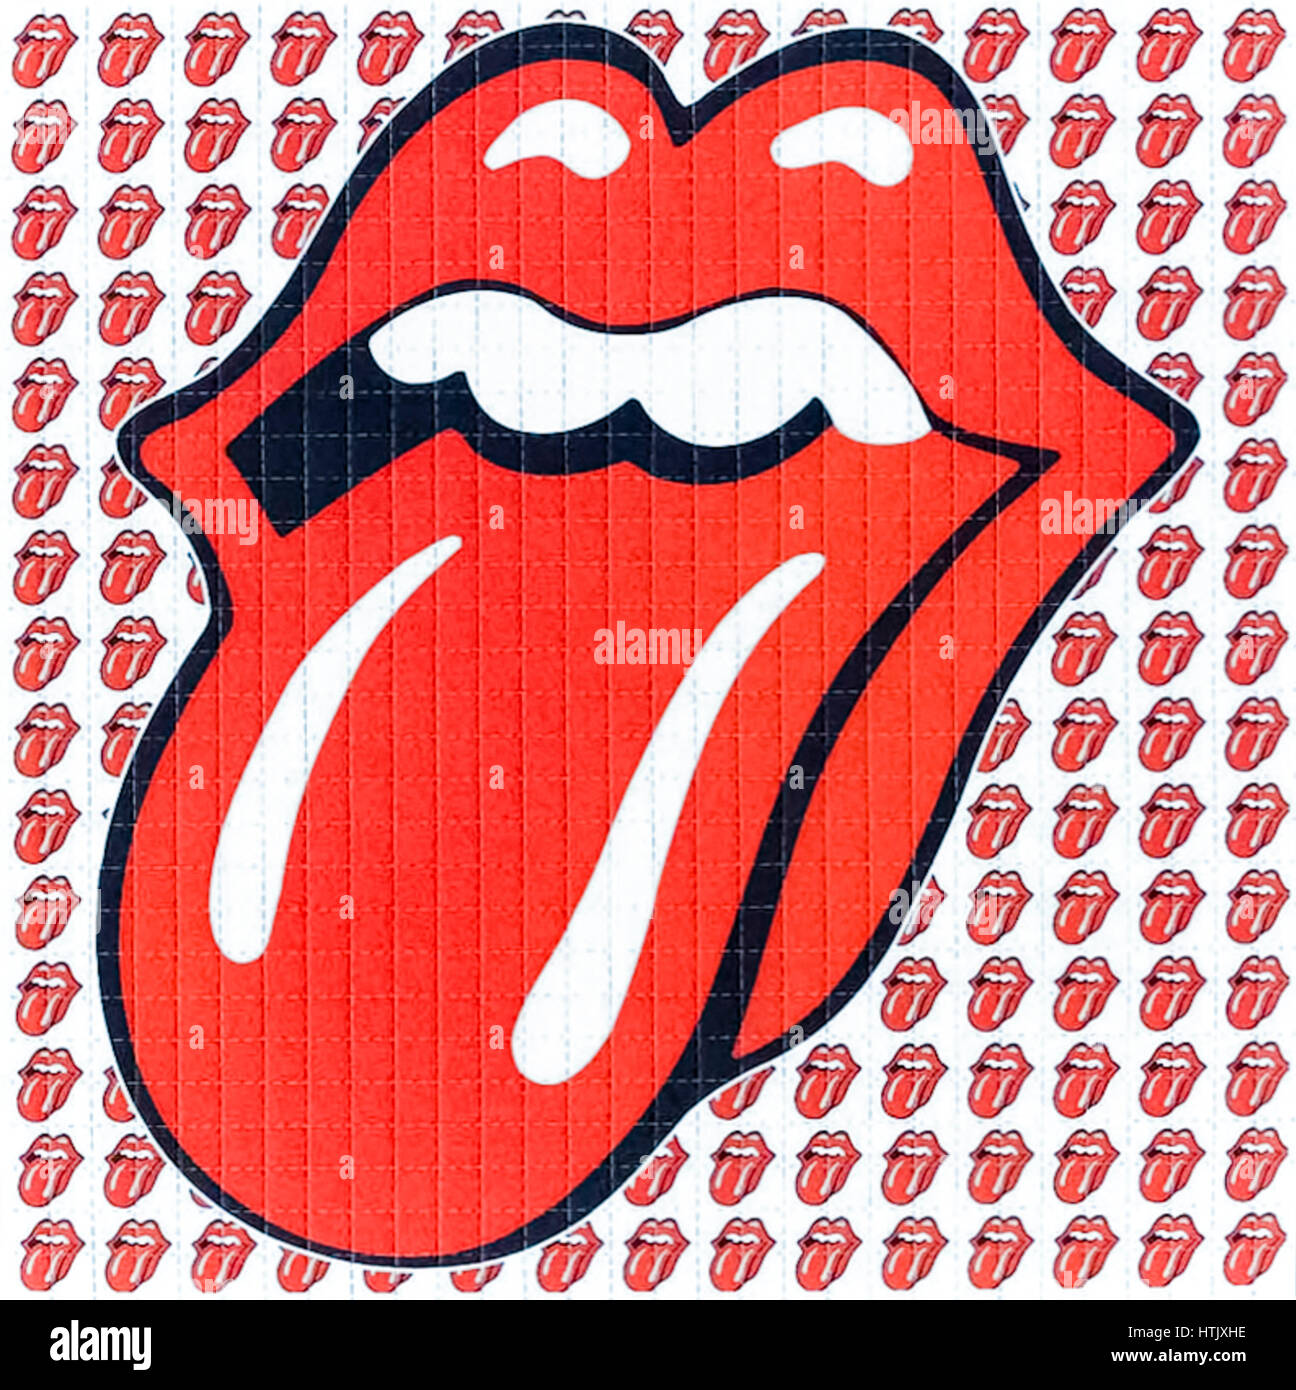 LSD blotter featuring the Rolling Stones’ tongue and lips logo by Jon Pasche. Blotters are made of absorbent blotting paper perforated into small sections that when detached become the individual doses. The absorbent paper is dipped in a measured quantity of LSD or other psychedelic drugs in liquid form such as 2CBCB-NBOMe and the tabs then sold in sealed bags with an indication of their individual strength. The blotter art often features colourful and recognisable designs and has become collectable in its own right. Stock Photo